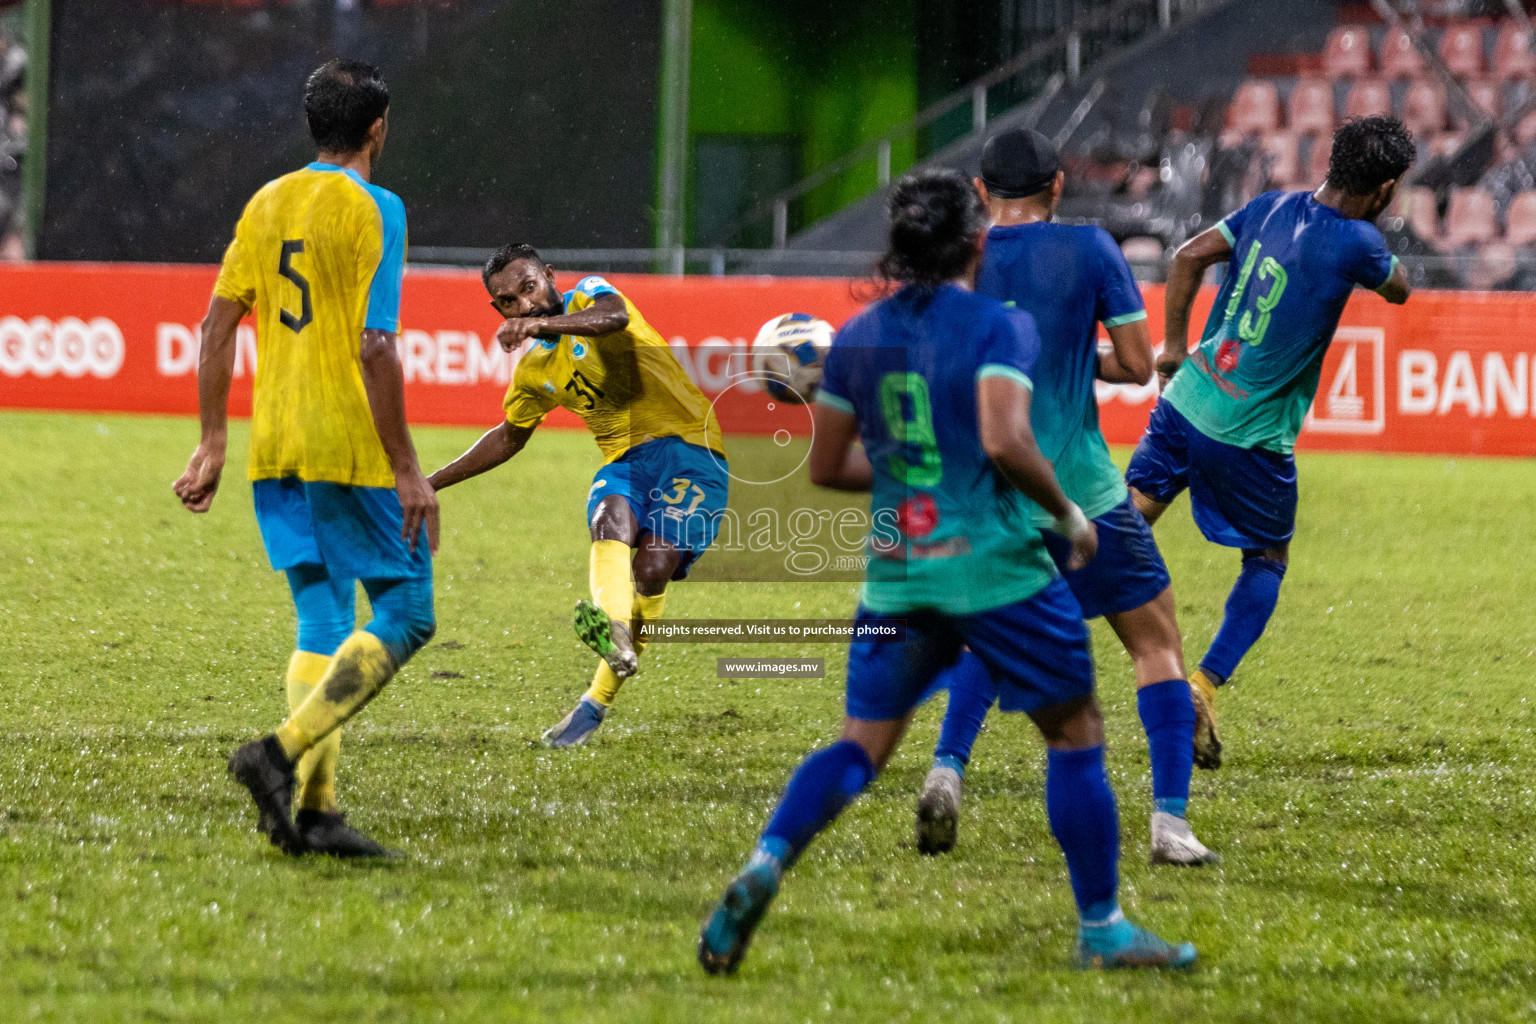 Club Valenca vs Super United Sports in Ooredoo Dhivehi Premier League 2021/22 held on 02 July 2022 in National Football Stadium, Male', Maldives